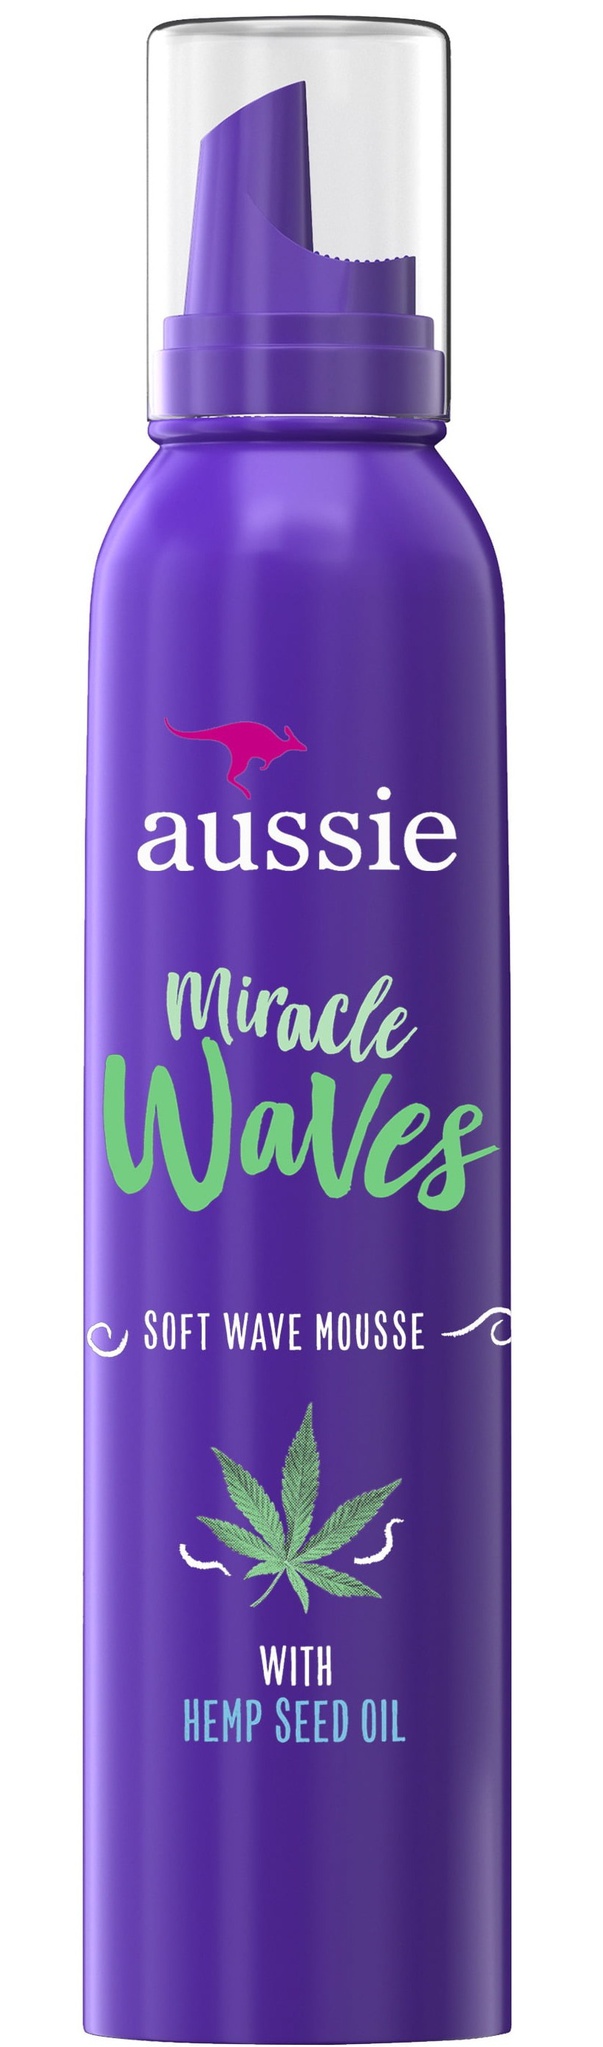 Aussie Miracle Waves Soft Wave Mousse